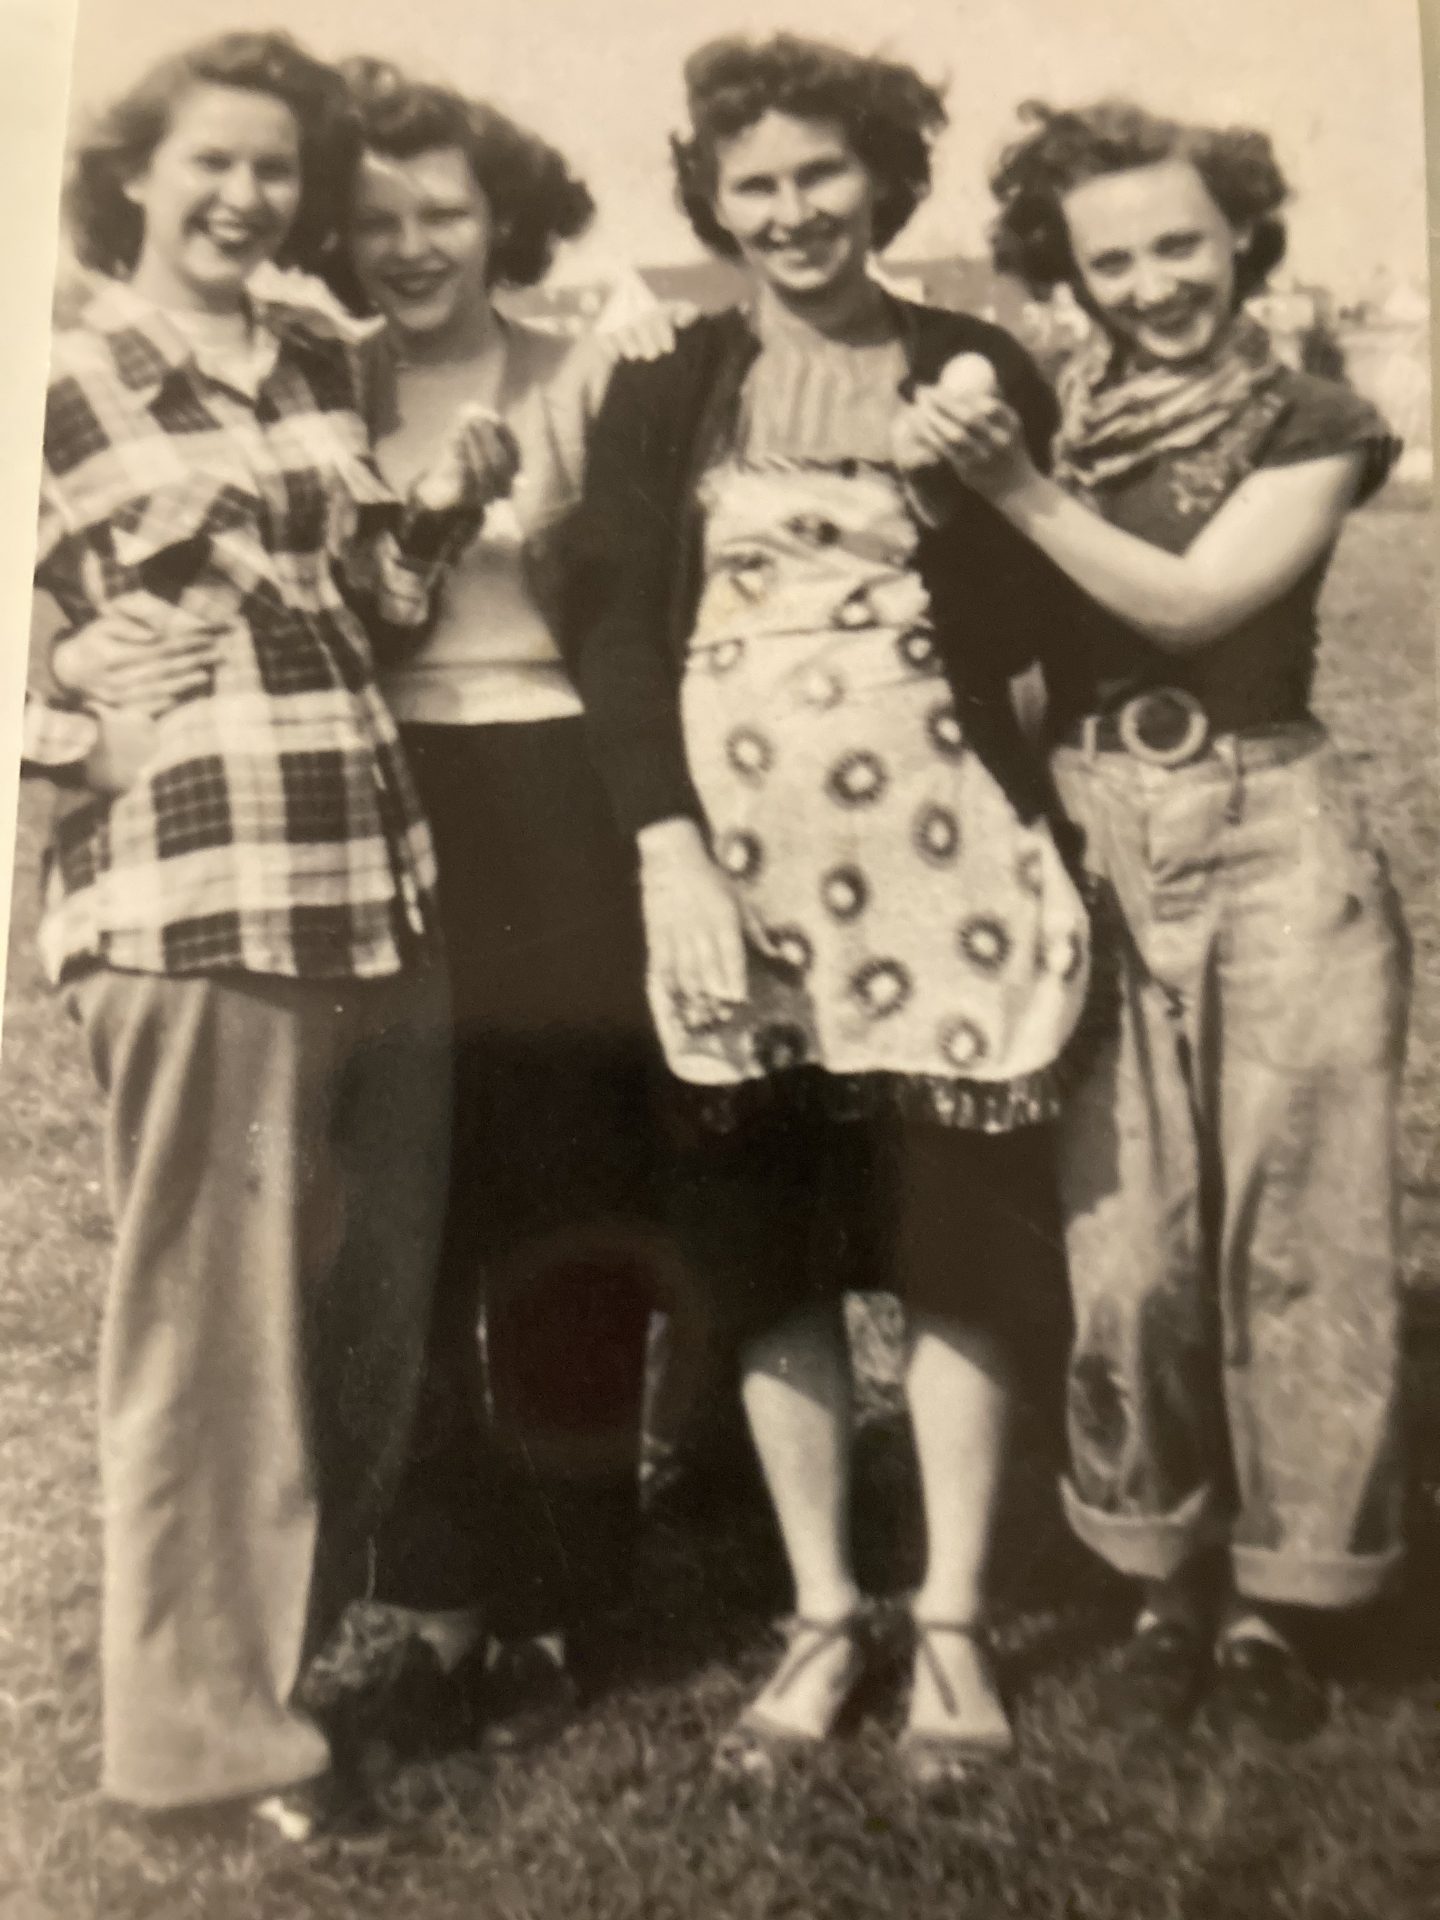 Wilma far right<br />
Aunt Jane and friends